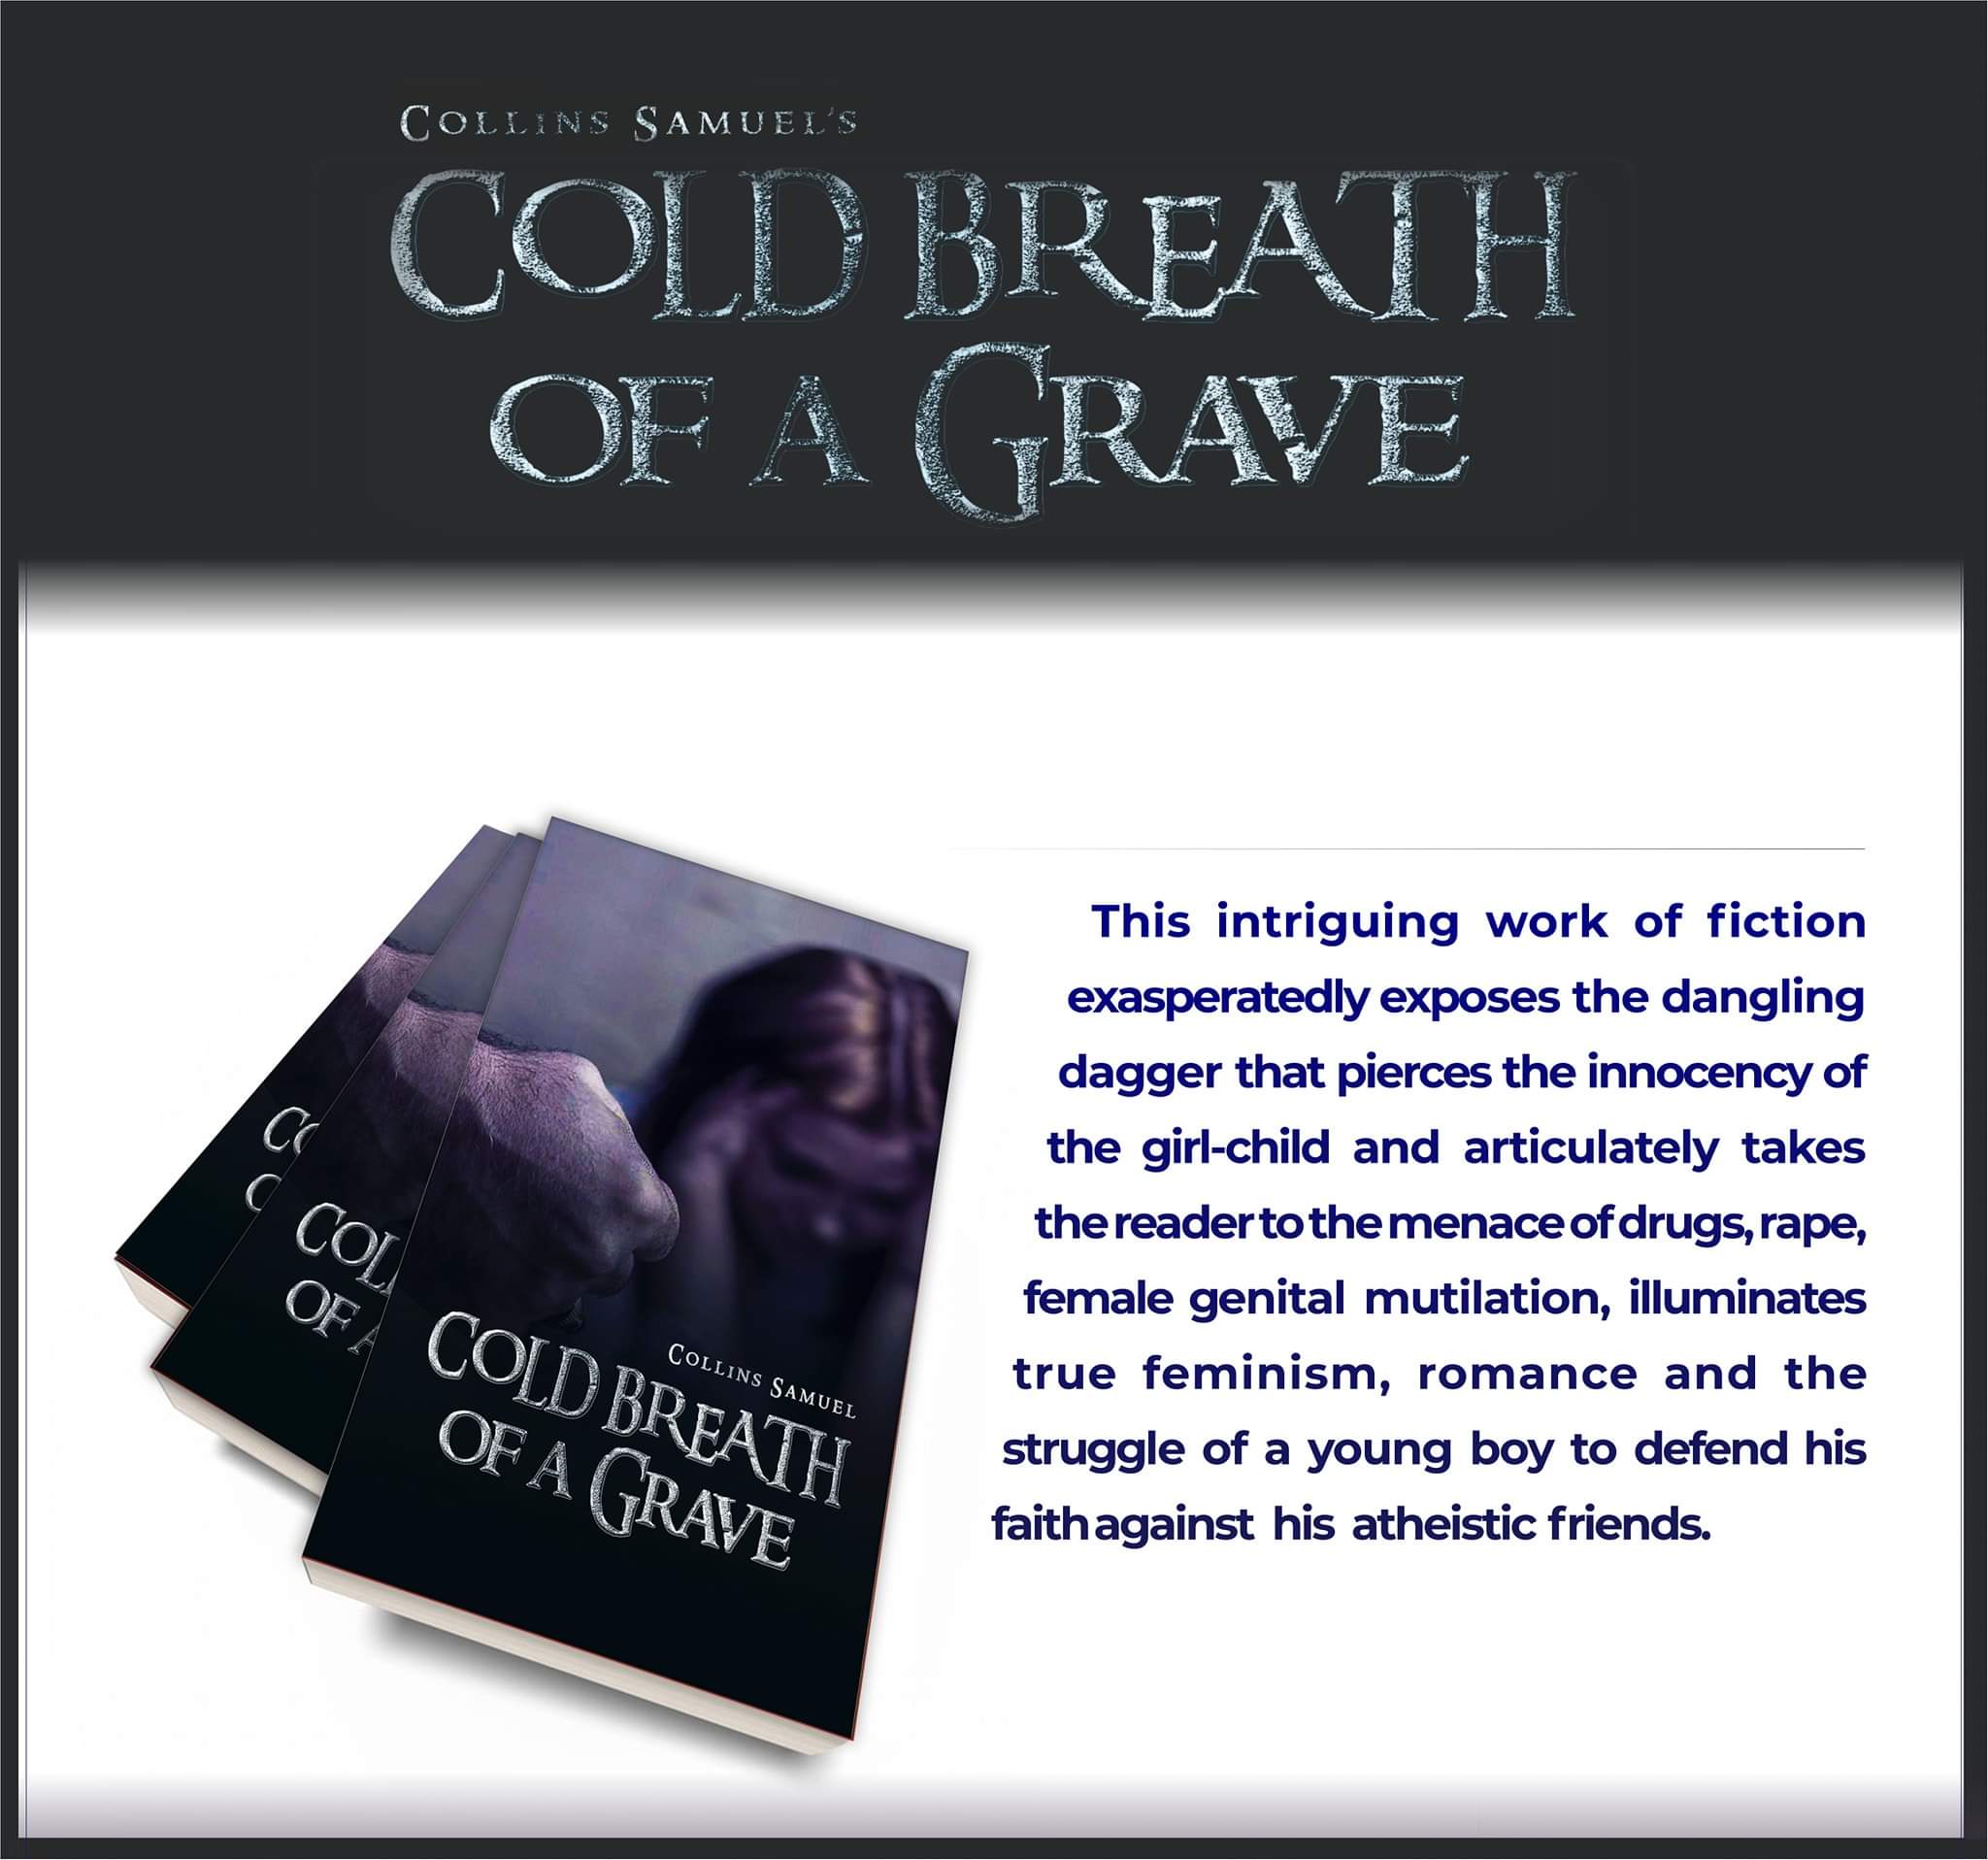 Cold Breathe of a Grave by Collins Samuel